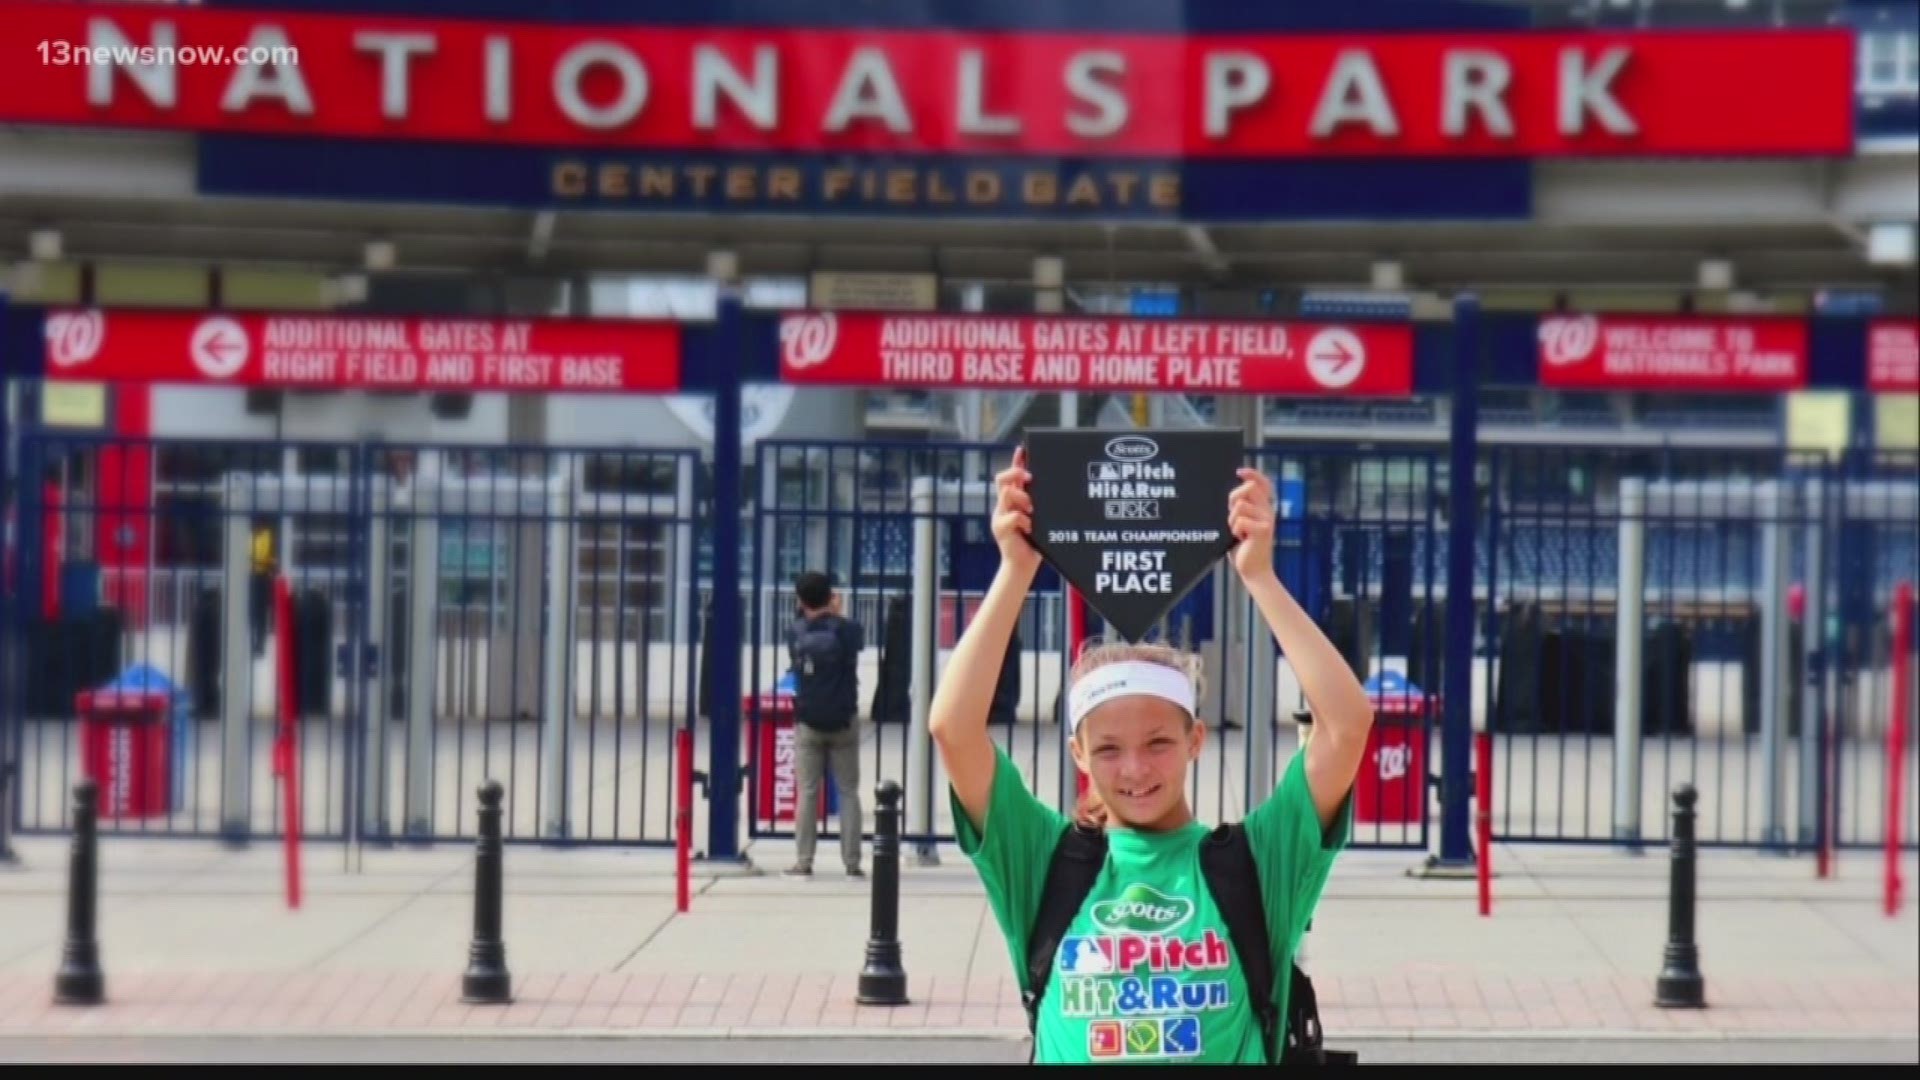 Taylor Langston, a 12-year old from Norfolk, recently won a regional Pitch, Hit and Run competition at National's Park in Washington D.C.